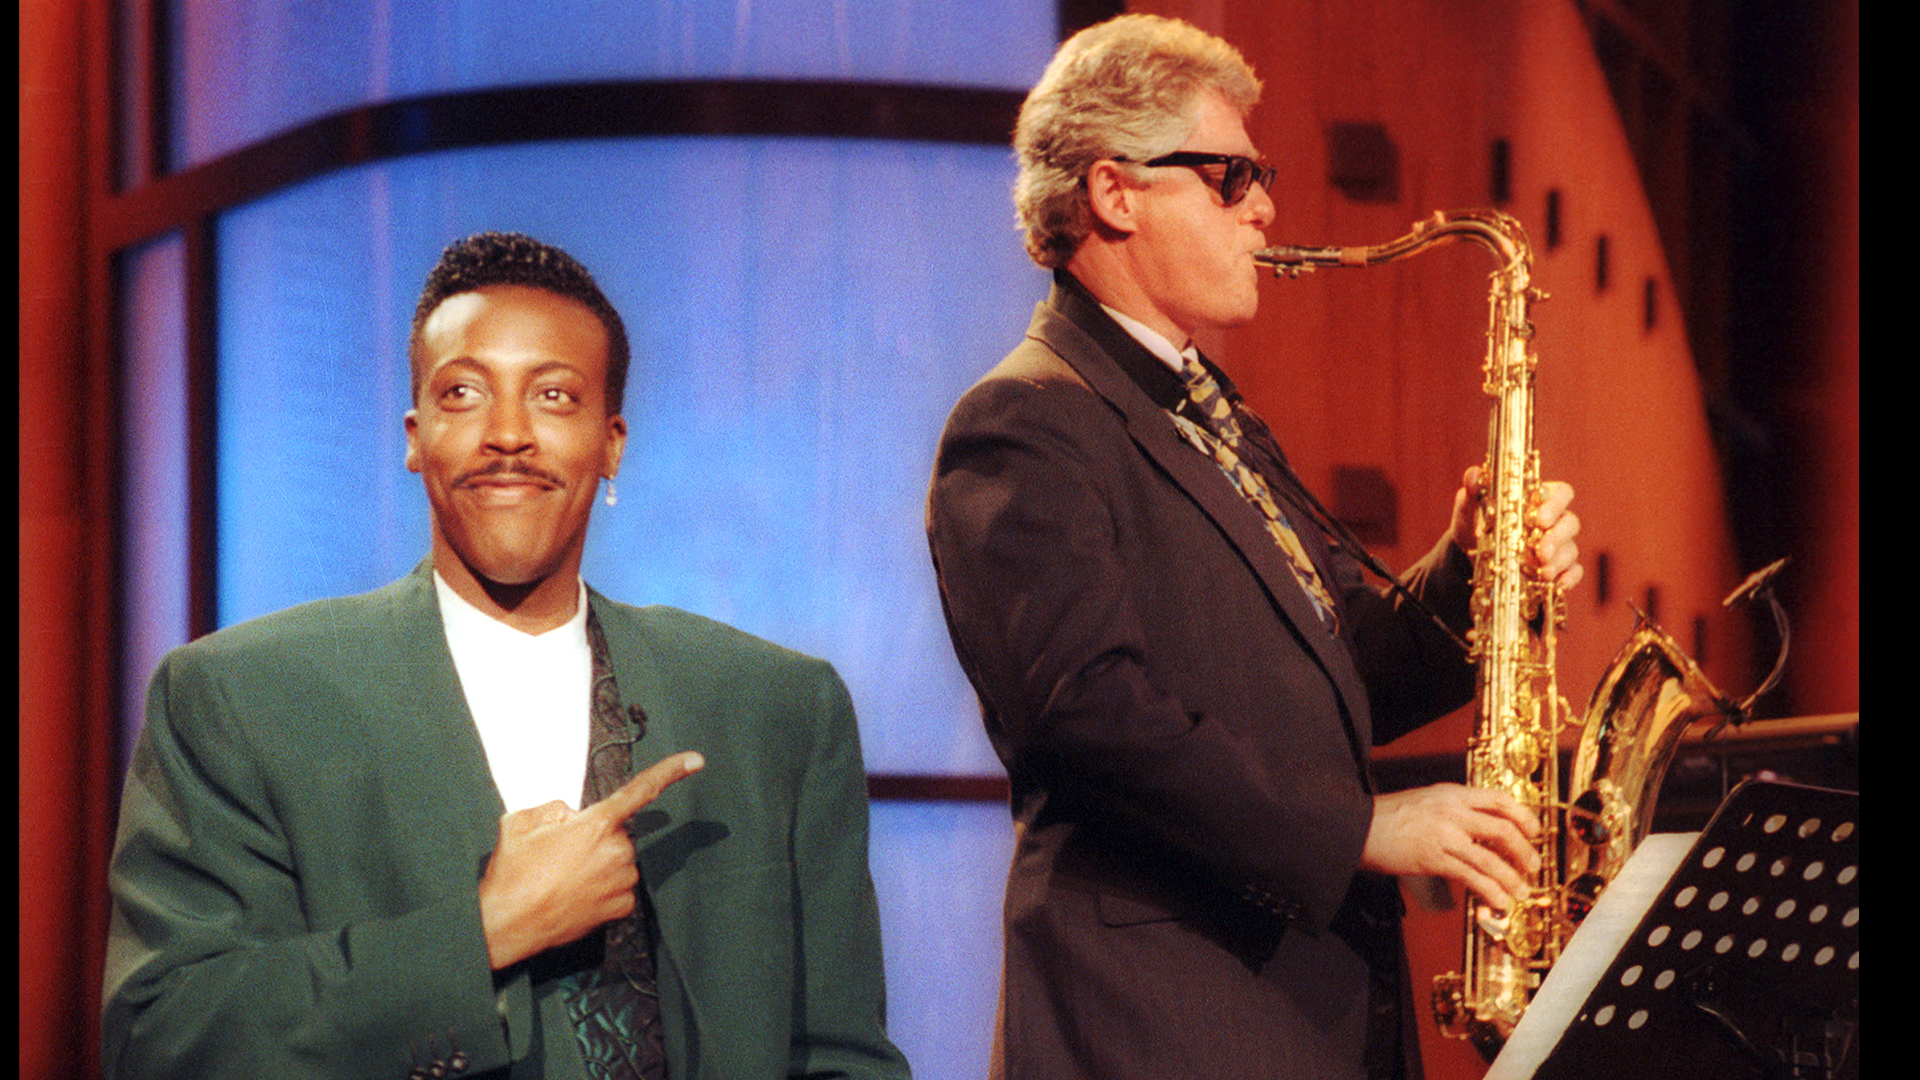 Gov. Bill Clinton, sitting with the band, turns out an impressive version of "Heatrbreak Hotel" as Arsenio Hall gestures approvingly in the musical opening of "The Arsenio Hall Show" taping at Paramount Studios in Hollywood, June 3, 1992. (AP Photo/Reed Saxon)